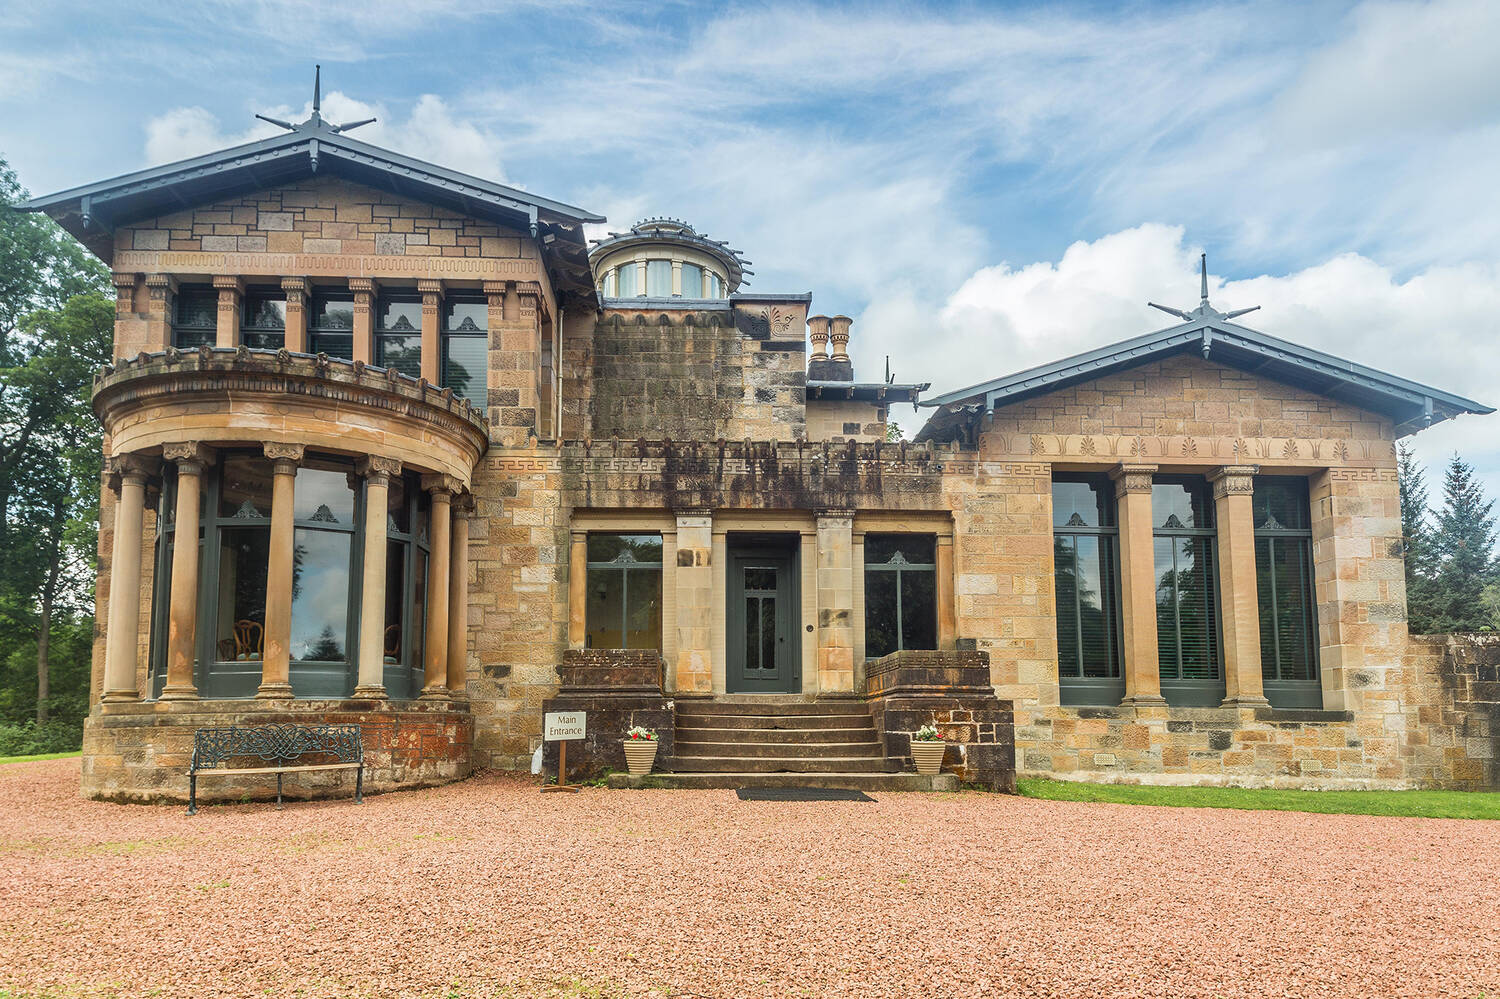 A view of the grand front exterior of Holmwood. It is a sandstone building, with columns and classical motifs. A large gravel area lies in front of the house.